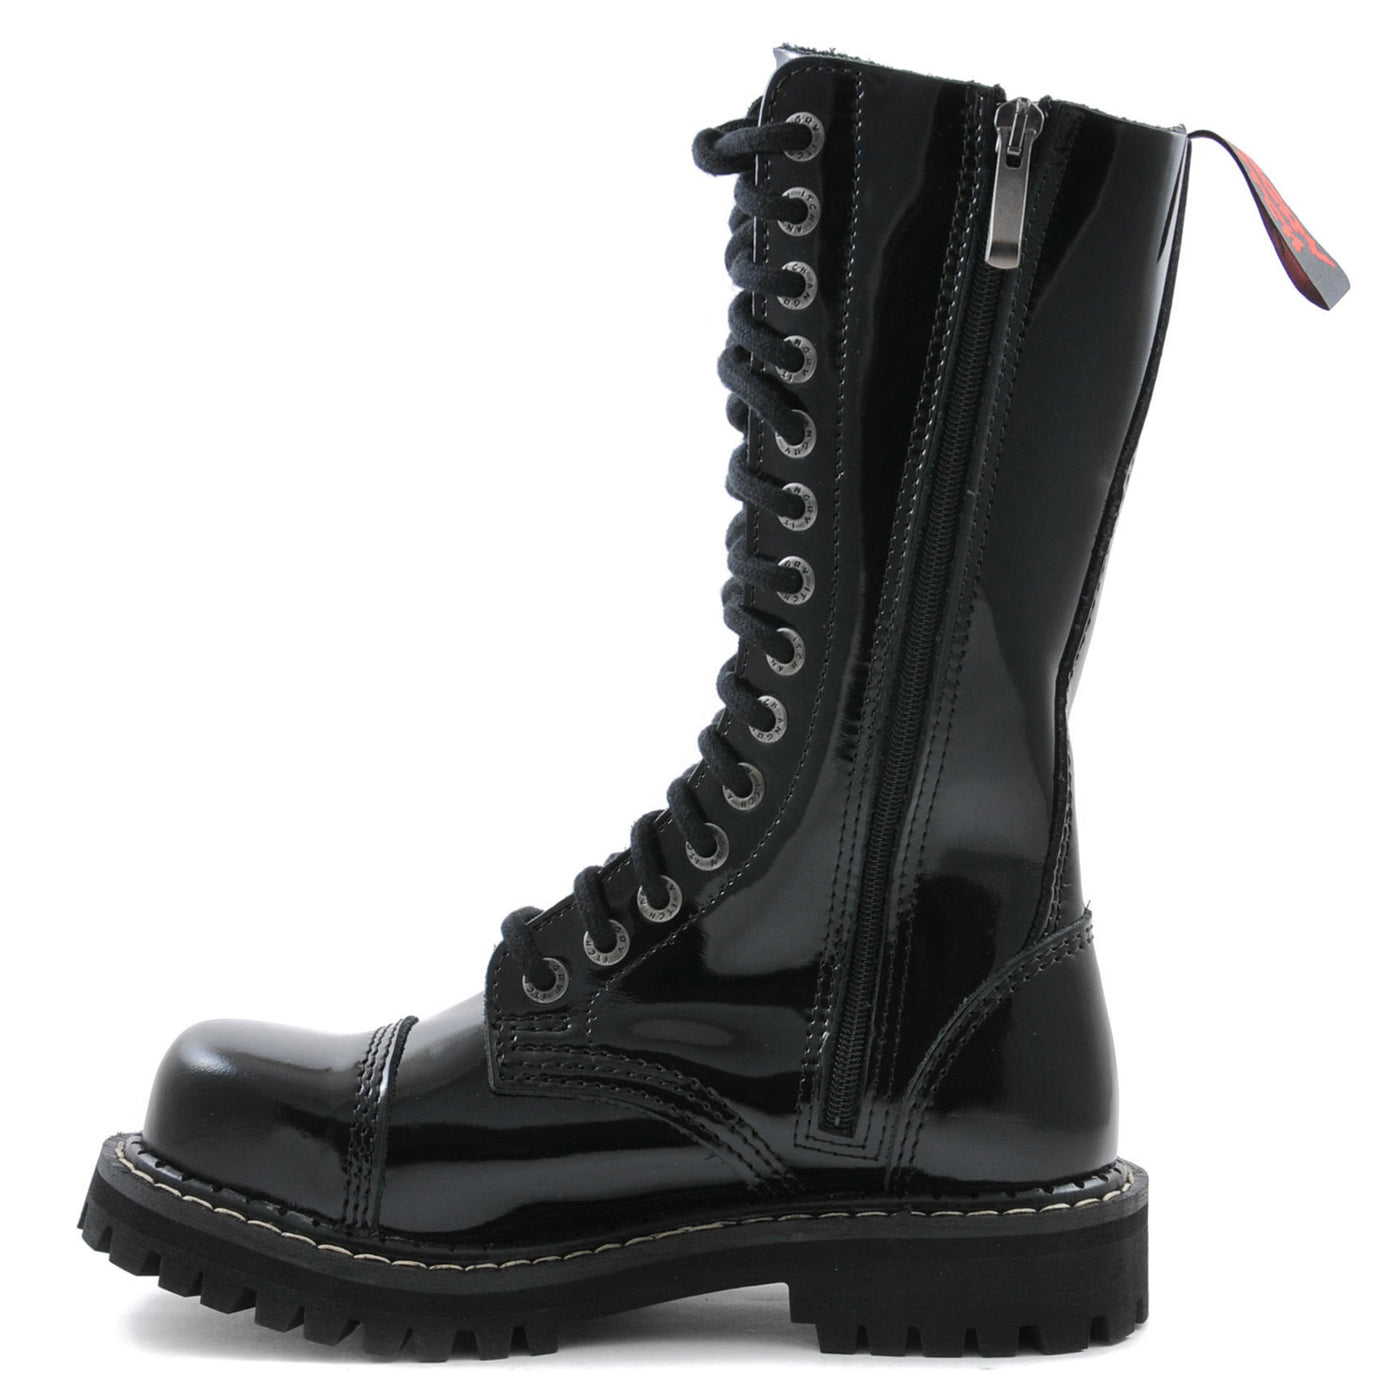 Angry Itch 14 Hole Combat Ranger Boots with Steel Toe Cap Black Patent Leather